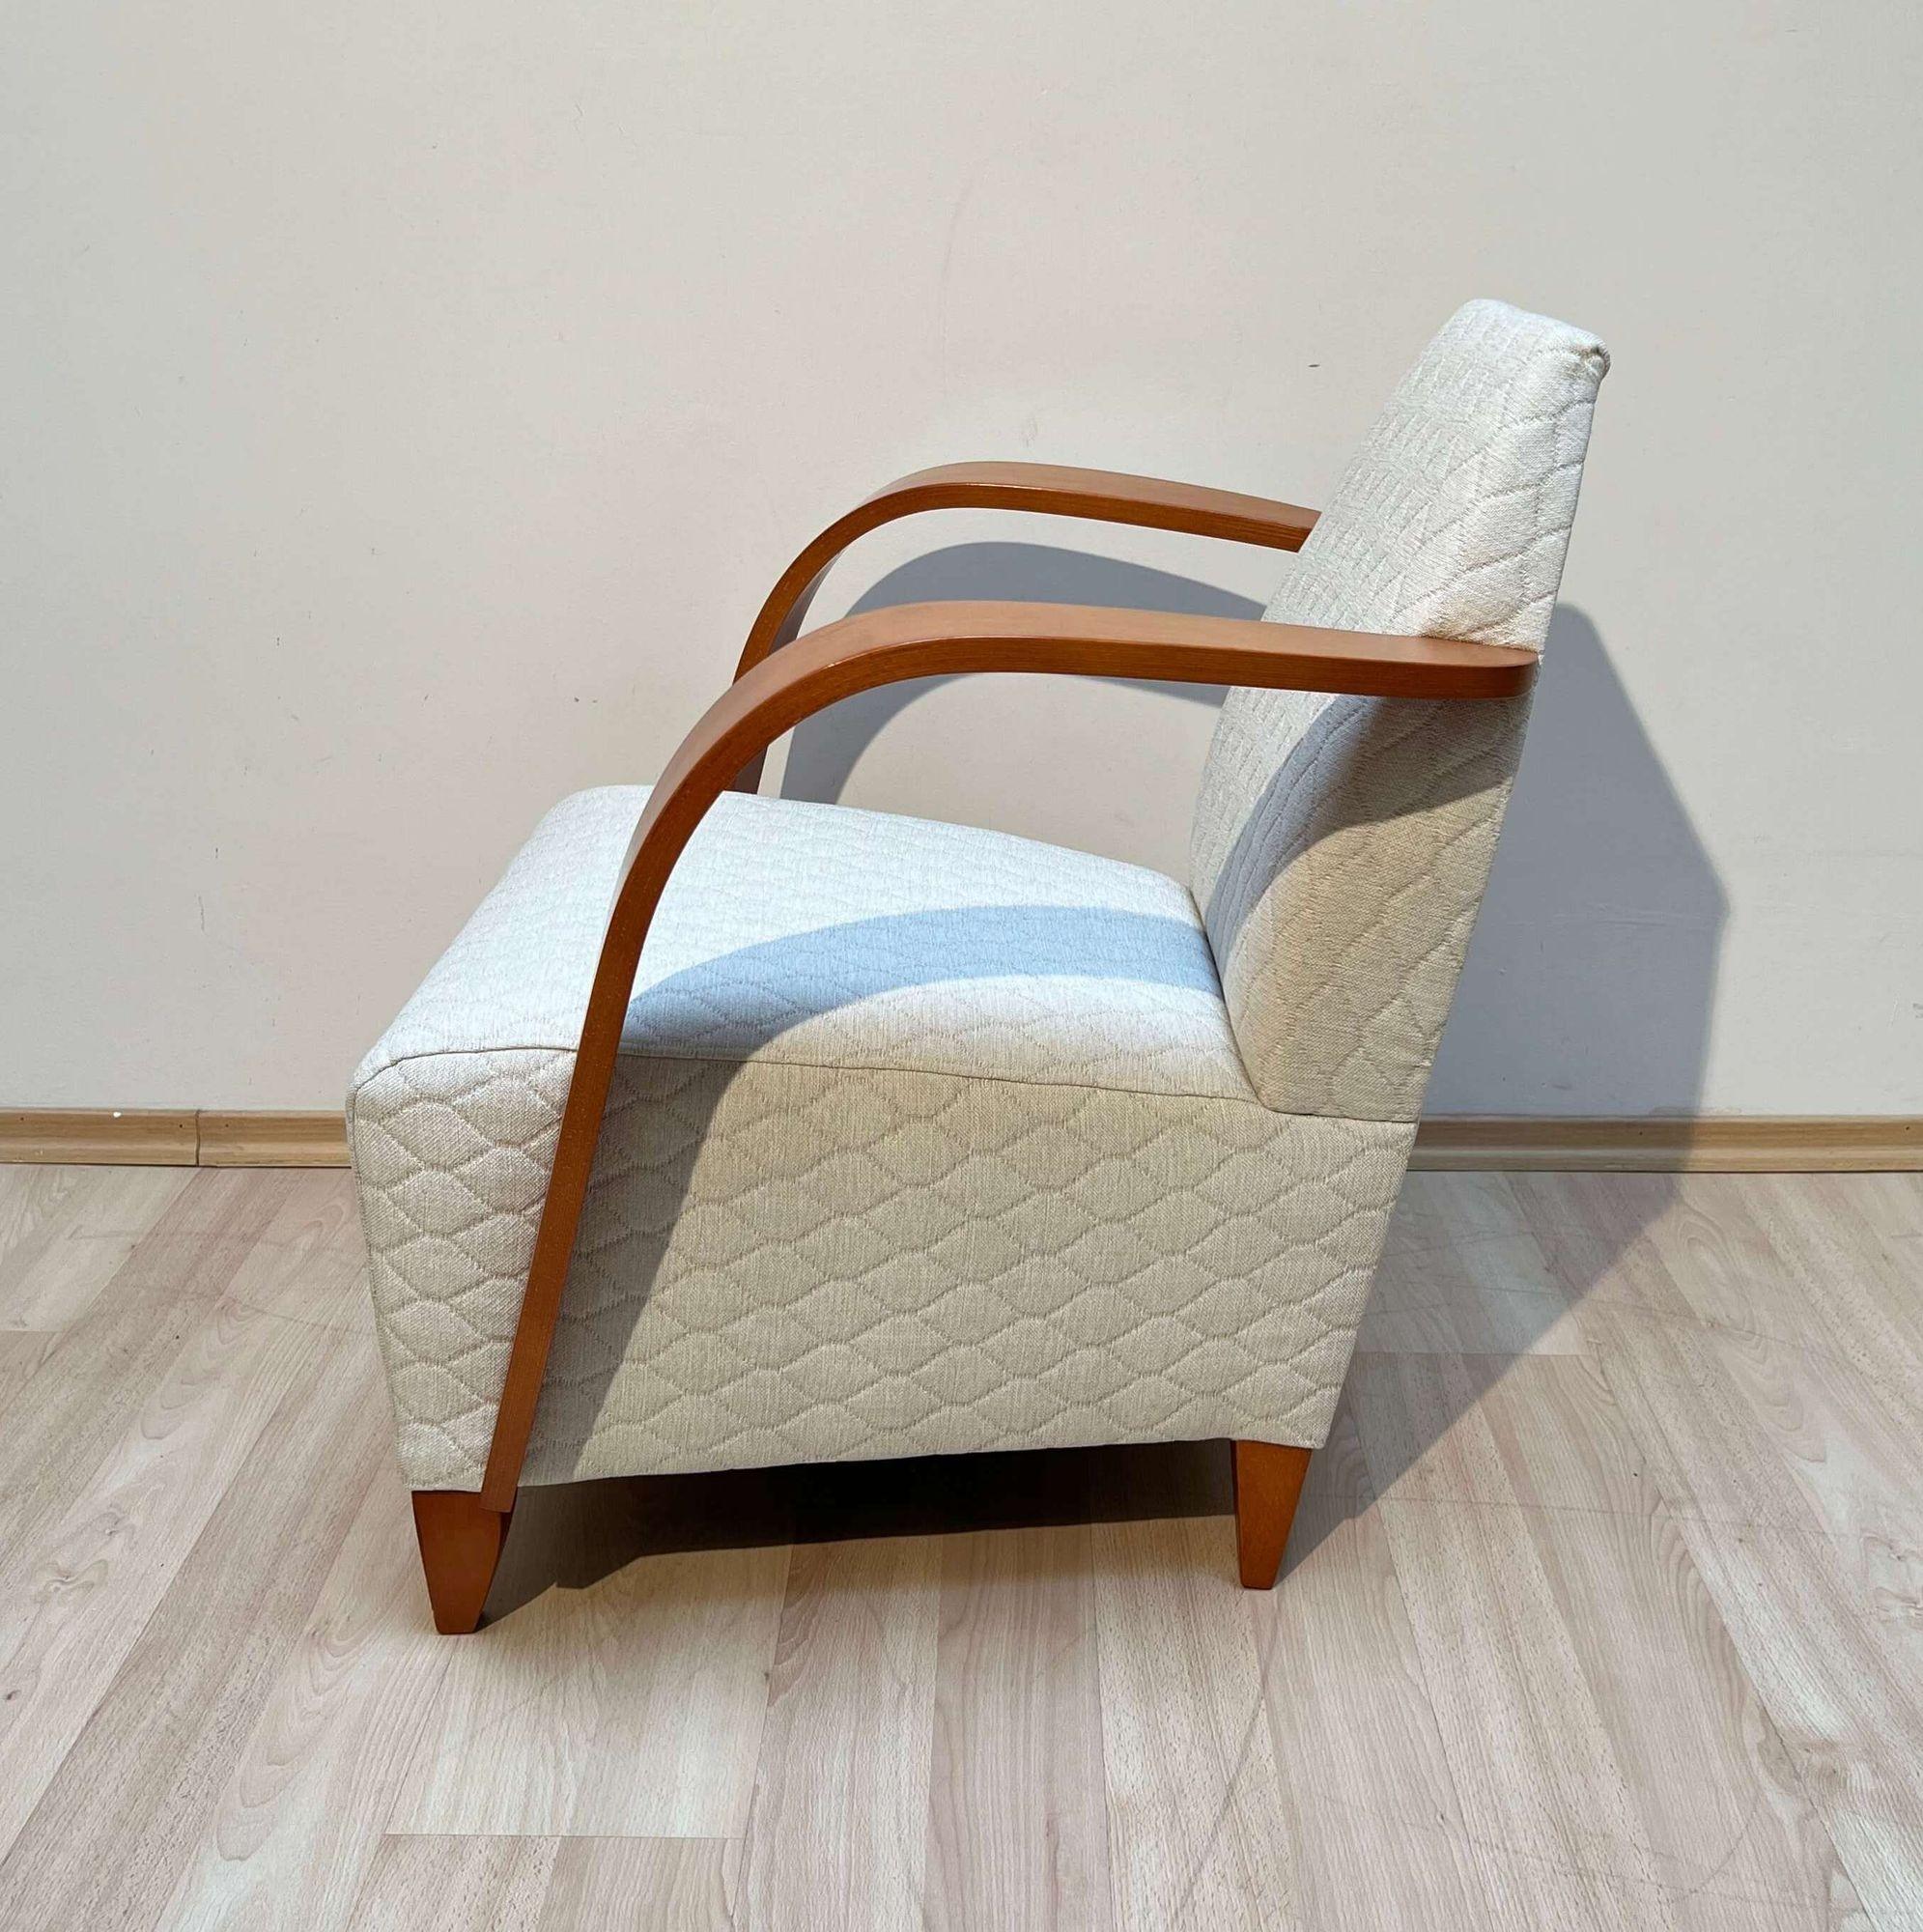 Design Arm Chair, Beech Wood, Cream-white Quilt Fabric, Spain, 1990s For Sale 3